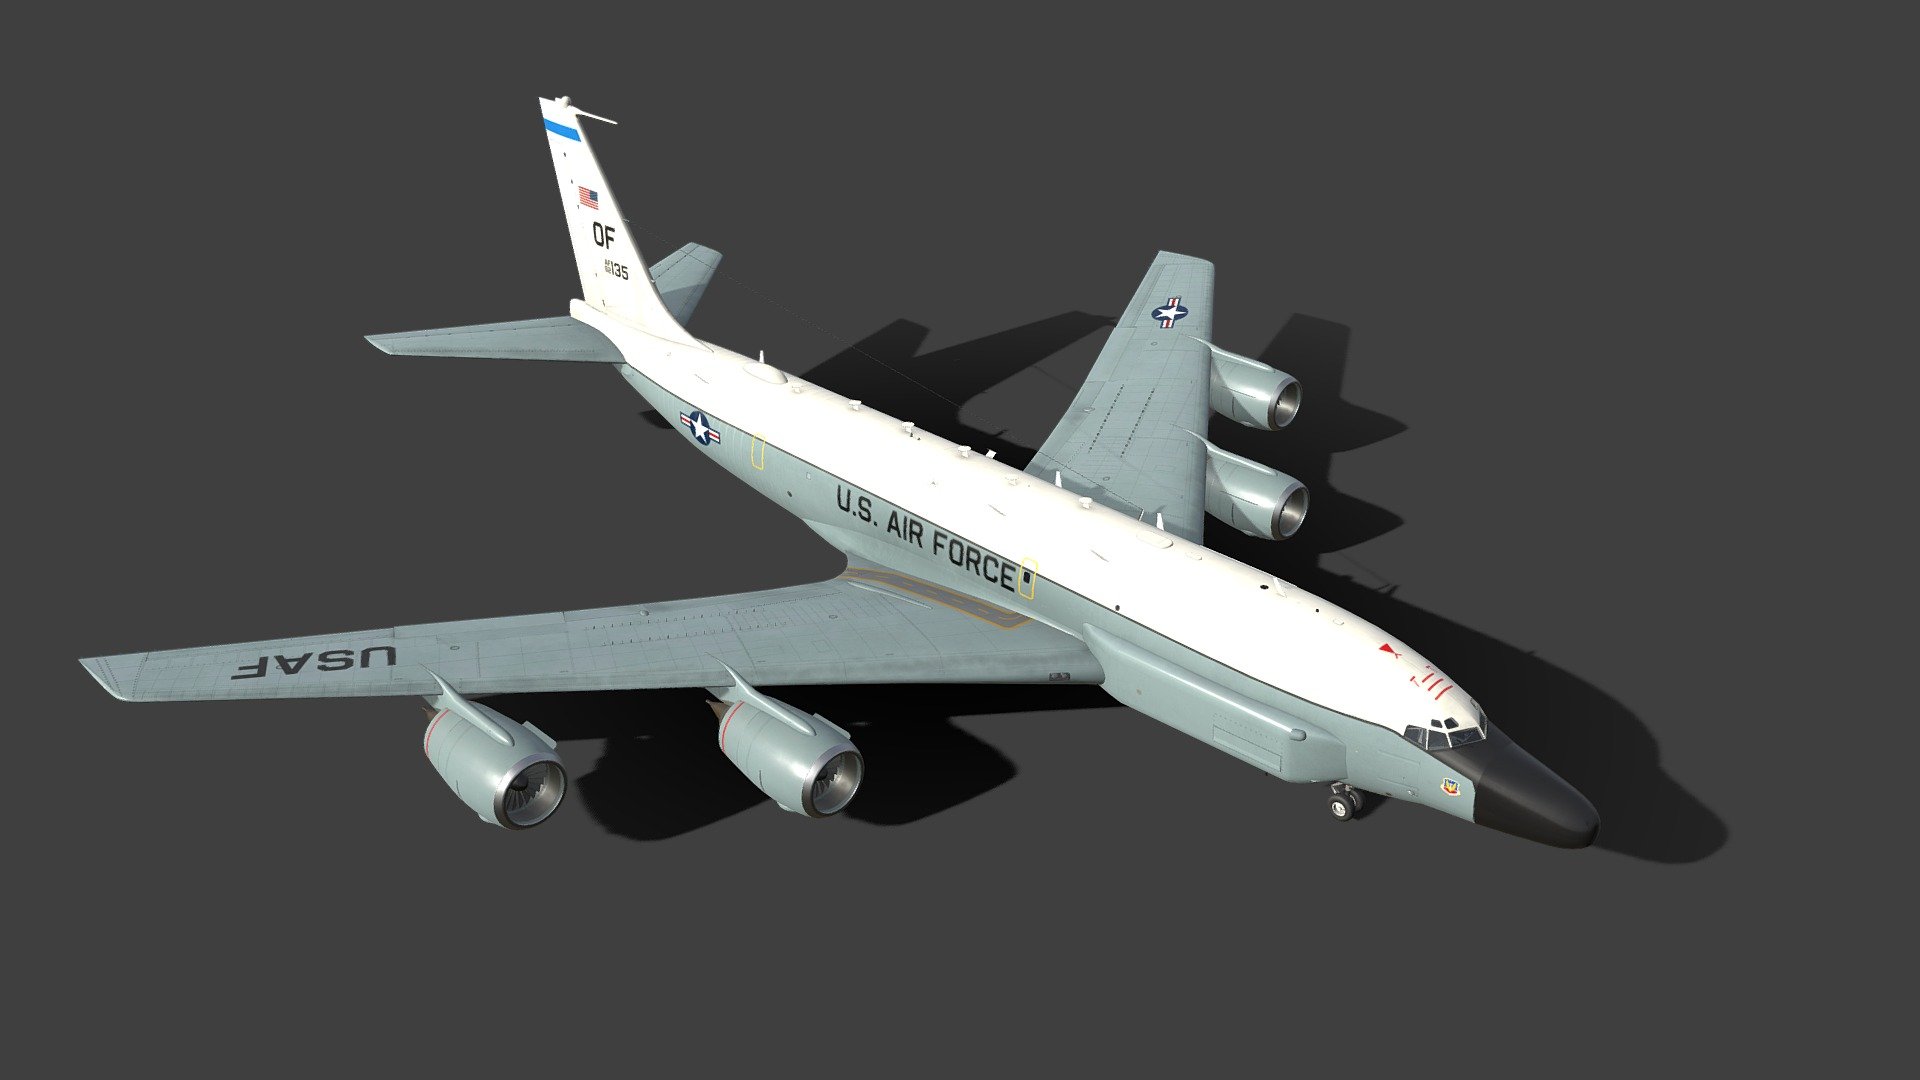 The Boeing RC-135 is a family of large reconnaissance aircraft built by Boeing and modified by a number of companies, including General Dynamics, Lockheed, LTV, E-Systems, and L3 Technologies, and used by the United States Air Force and Royal Air Force to support theater and national level intelligence consumers with near real-time on-scene collection, analysis and dissemination capabilities. Based on the C-135 Stratolifter airframe, various types of RC-135s have been in service since 1961 3d model